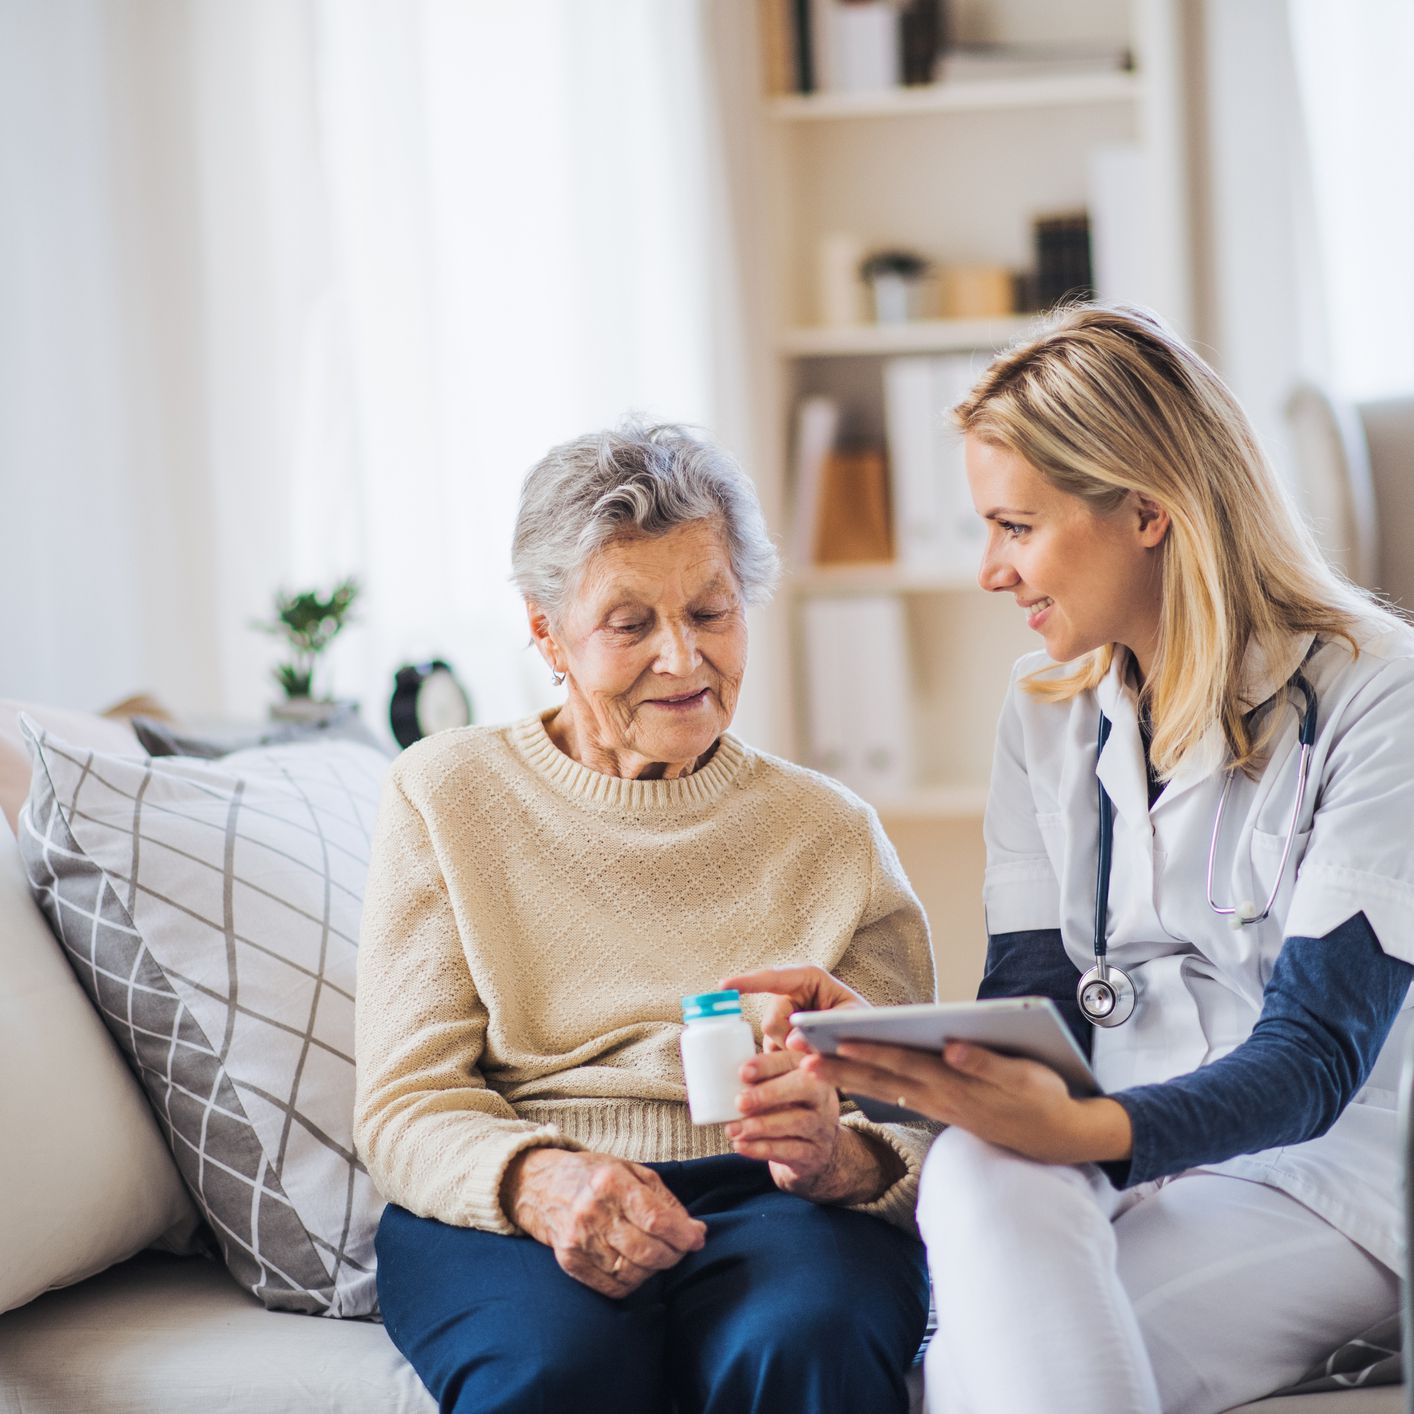 Tips From Elder Law Attorneys On Preparing Your Aging Parents For Future Years